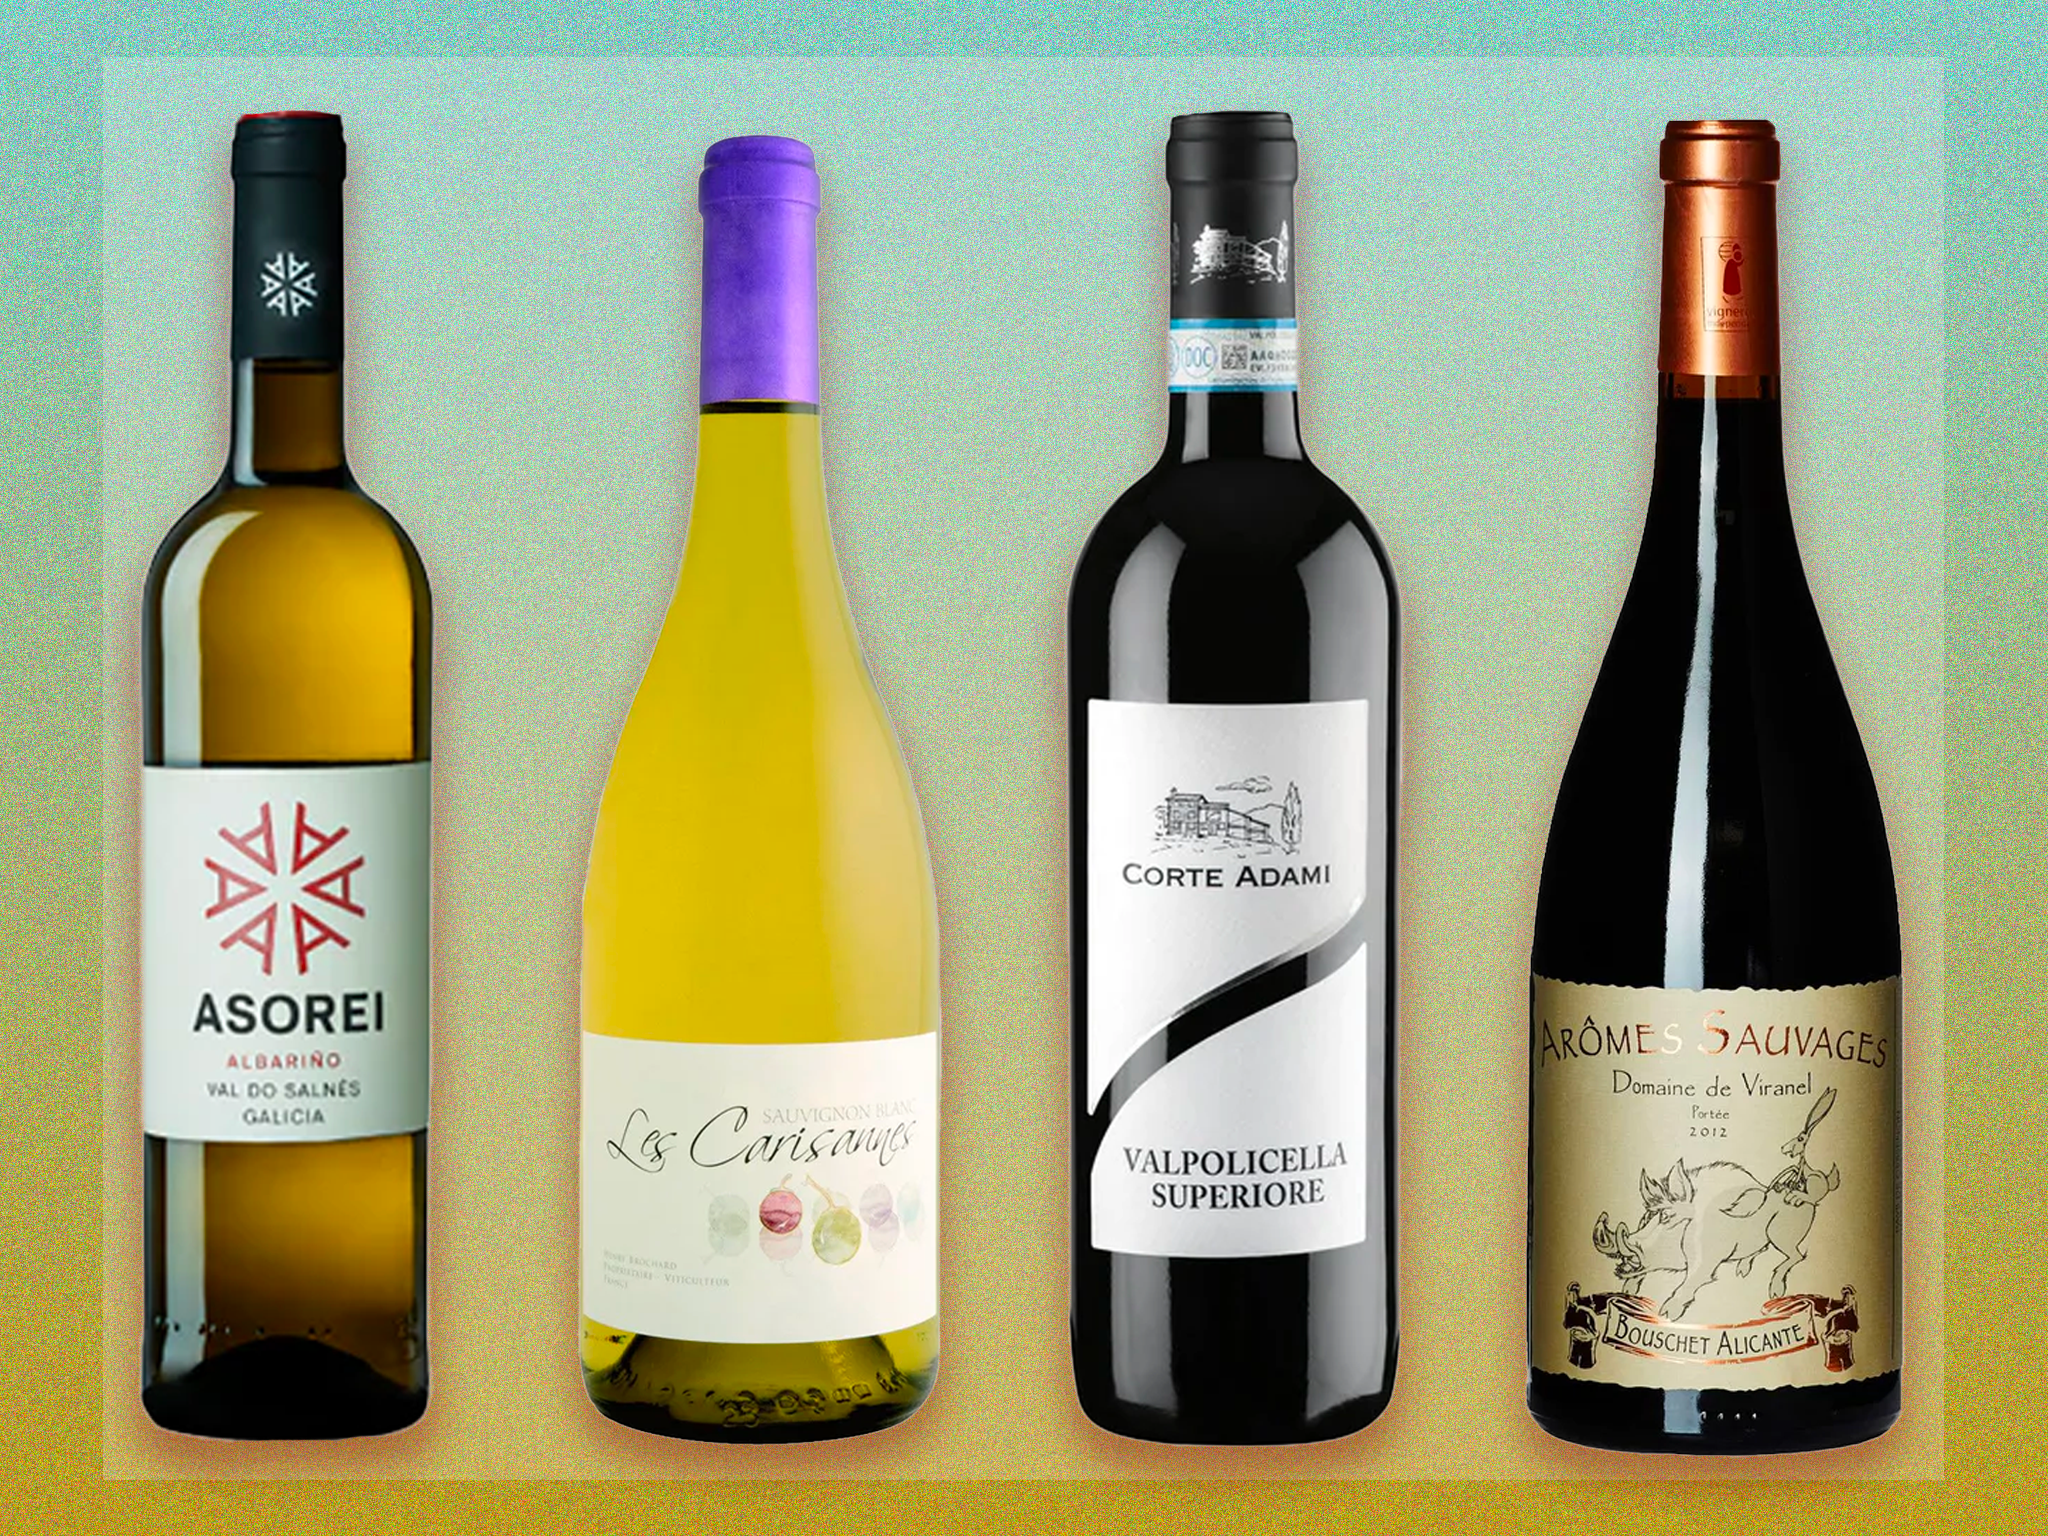 Connoisseur’s choice: Six wines to savour this spring, according to an expert